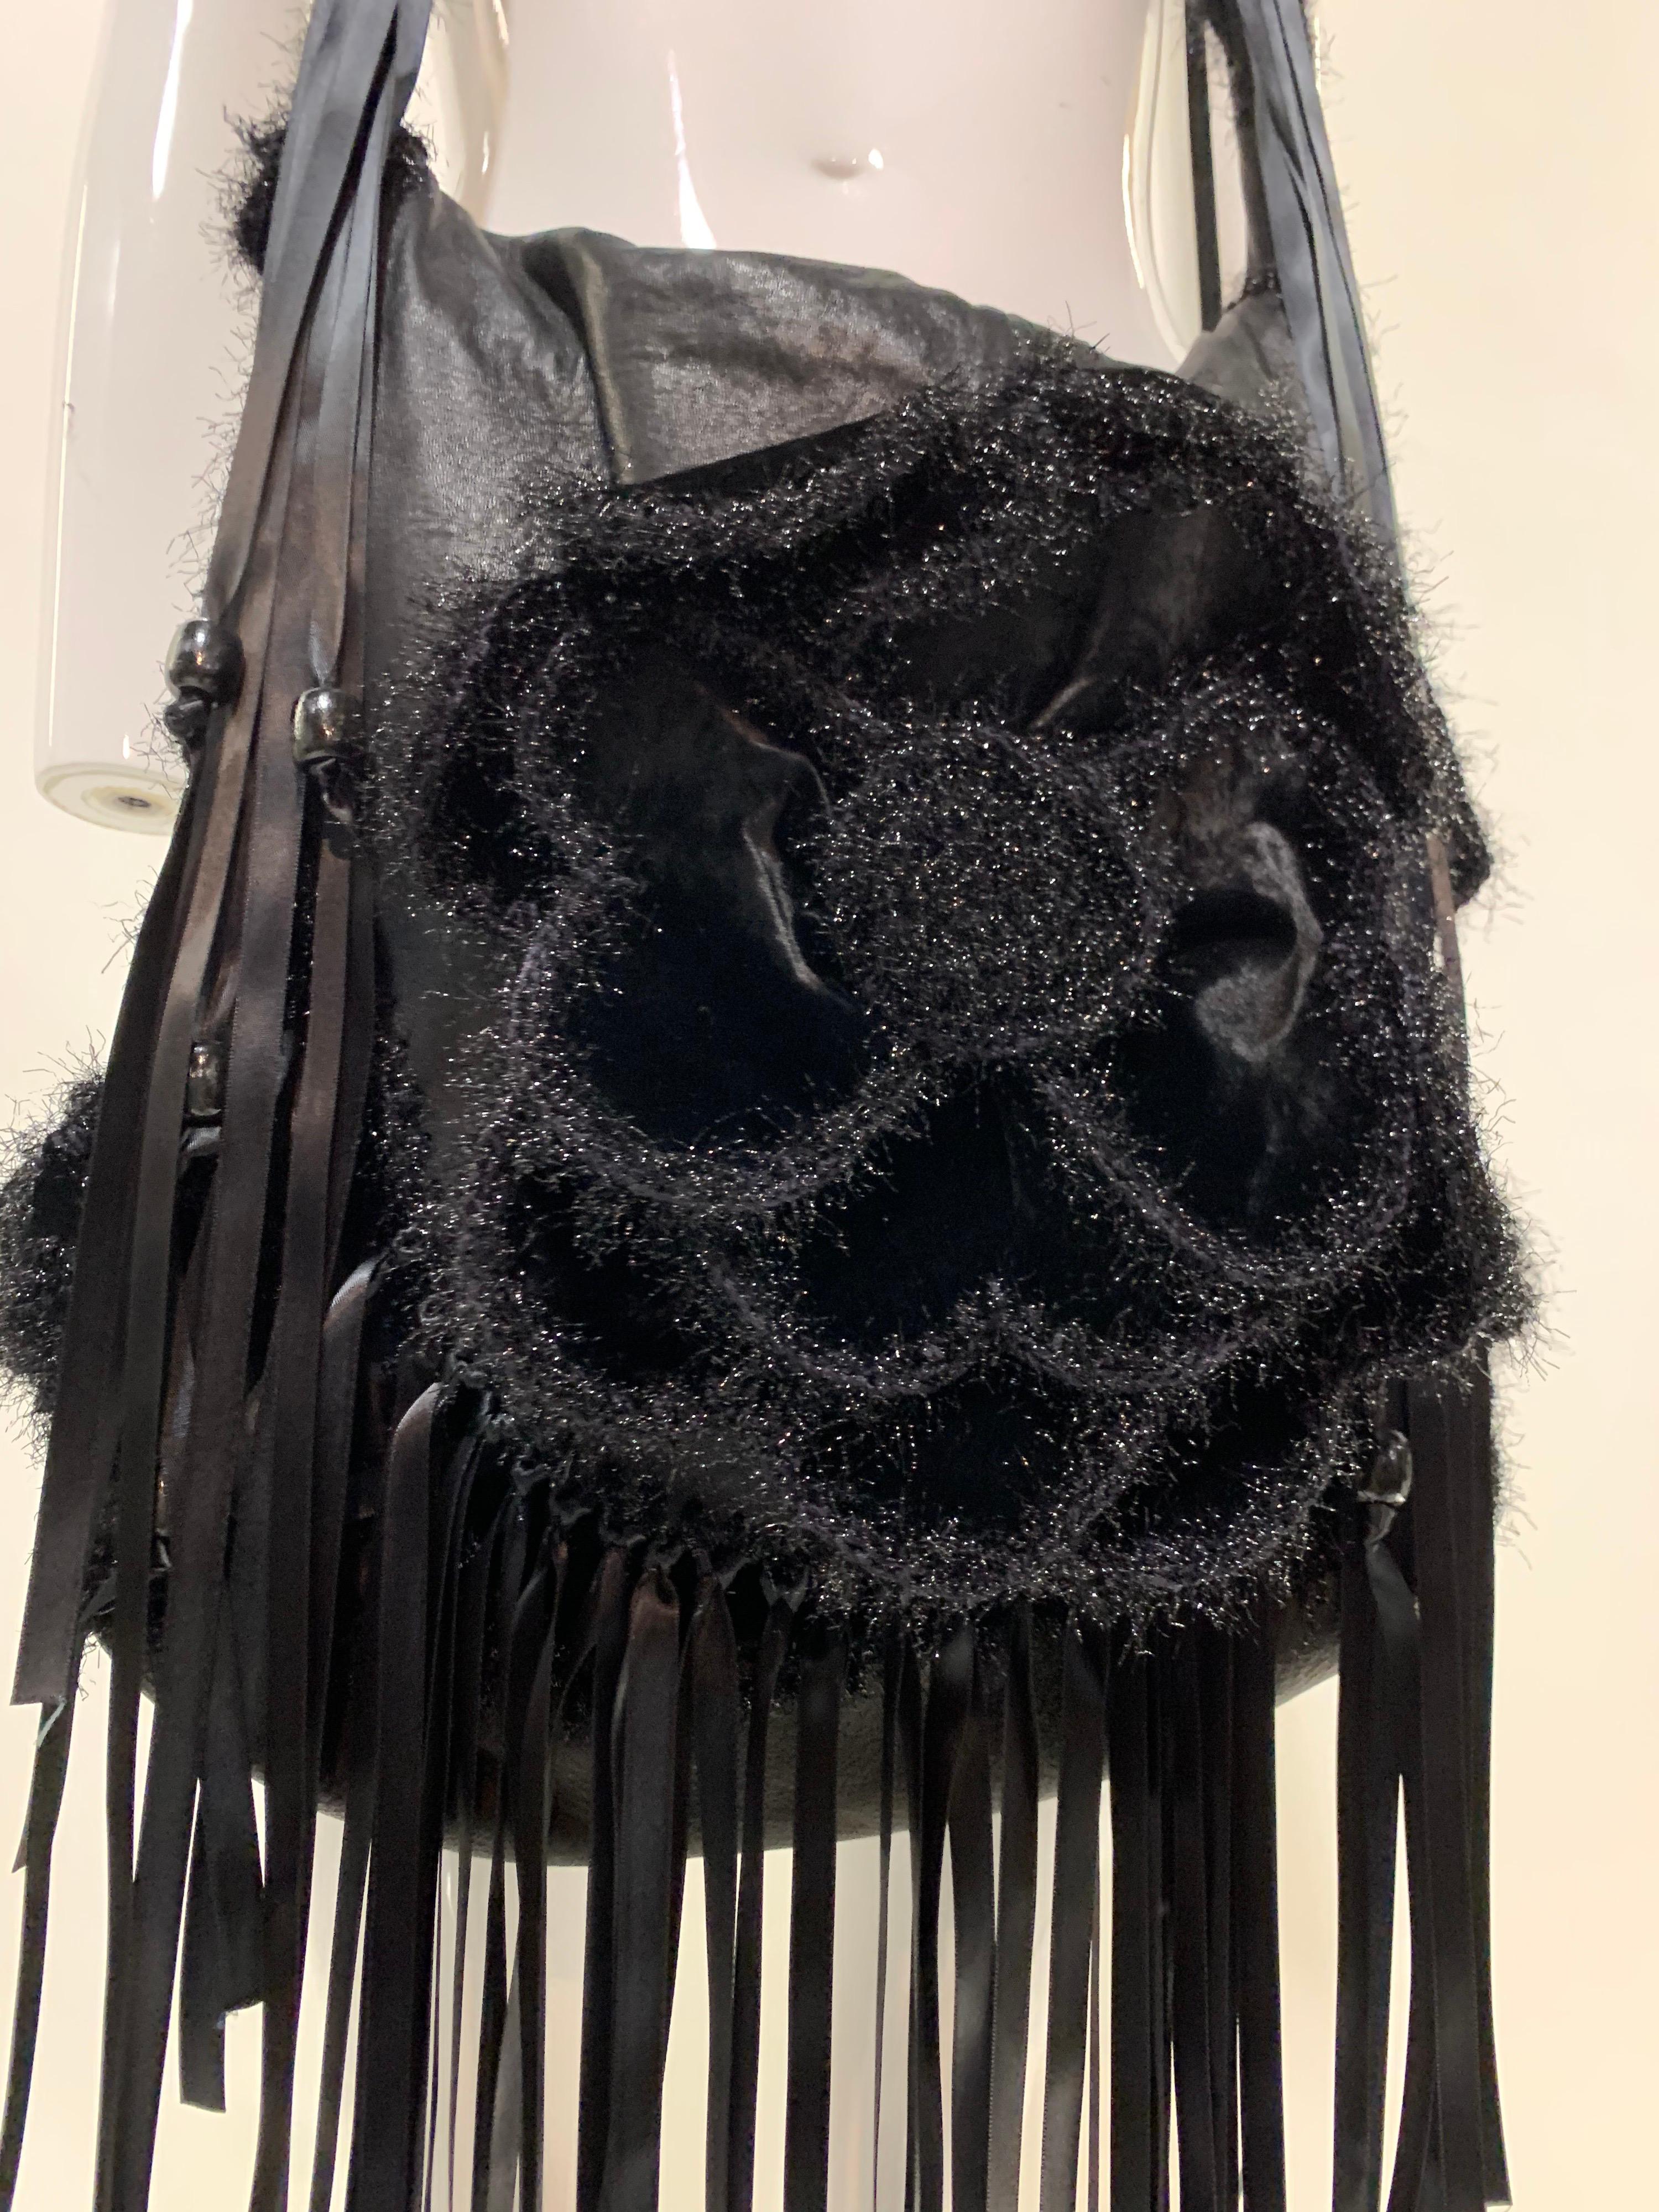 A fabulous Torso Creations black leather and velvet Flower-Power satchel purse with a large molded 3-dimensional rose at top and macrame strap. Silk satin ribbon fringe throughout. Hand-made for Torso Creations. Size Large.